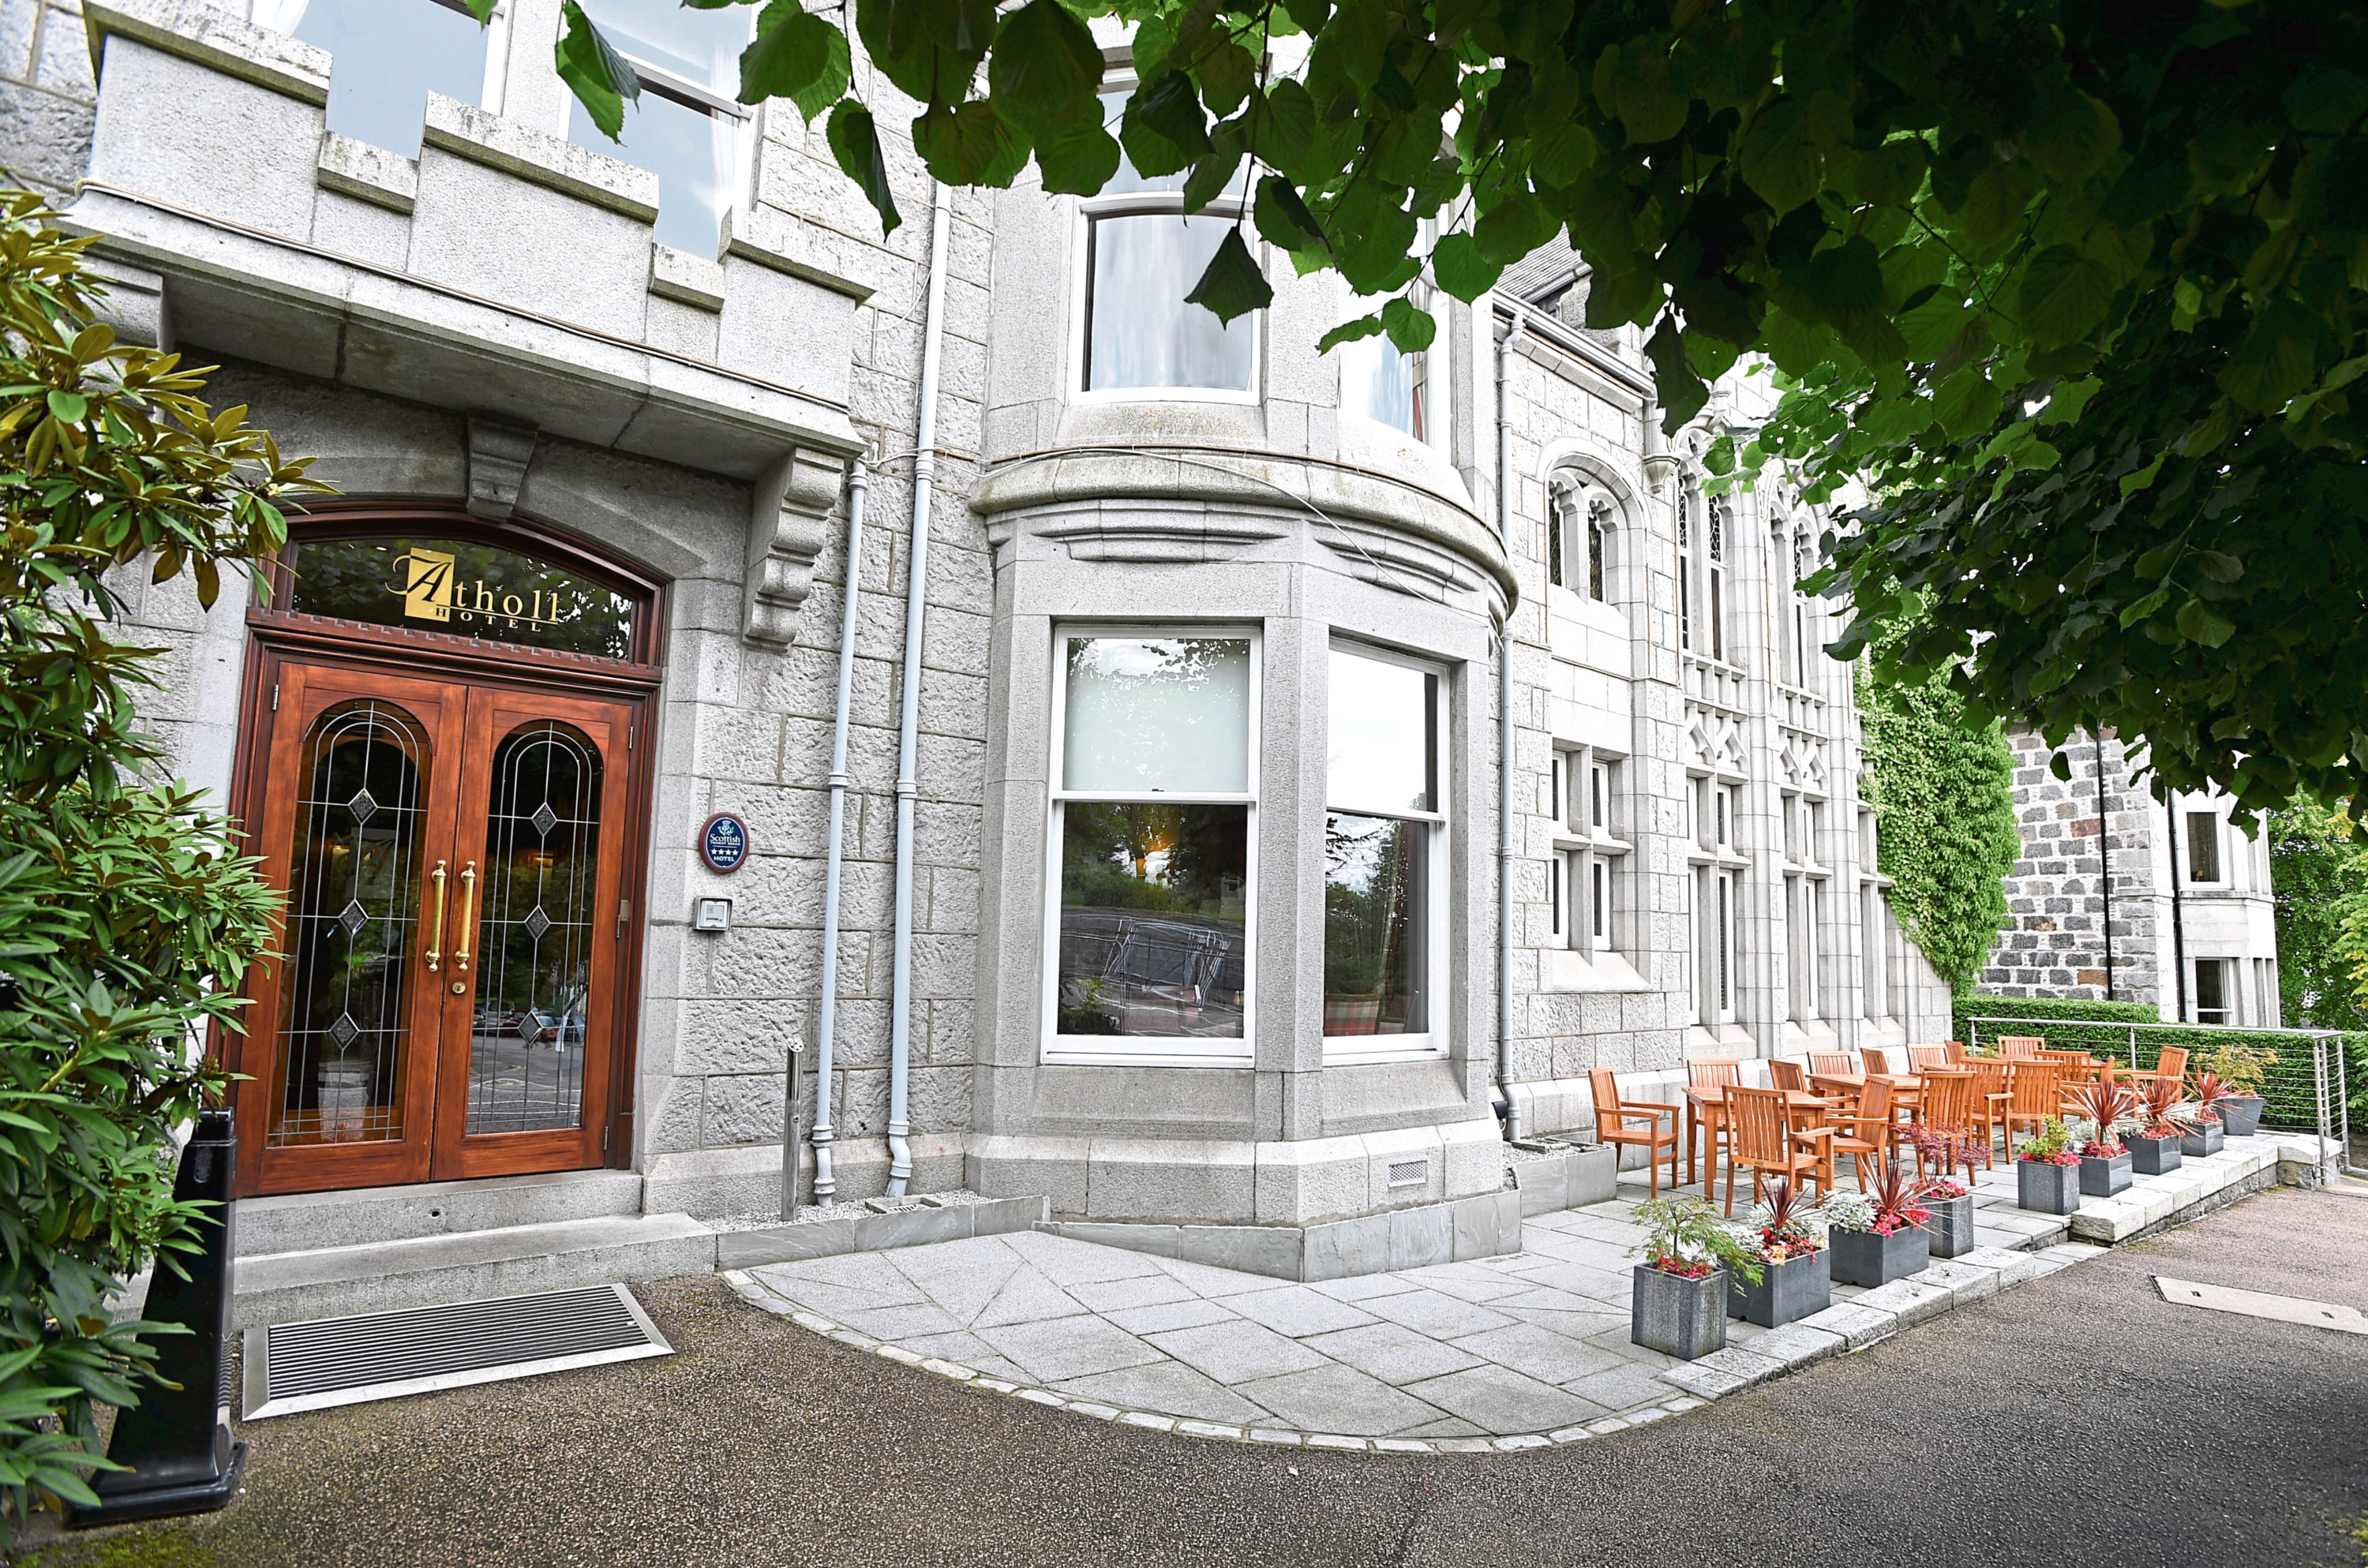 Atholl Hotel in the heart of Aberdeen’s popular west end